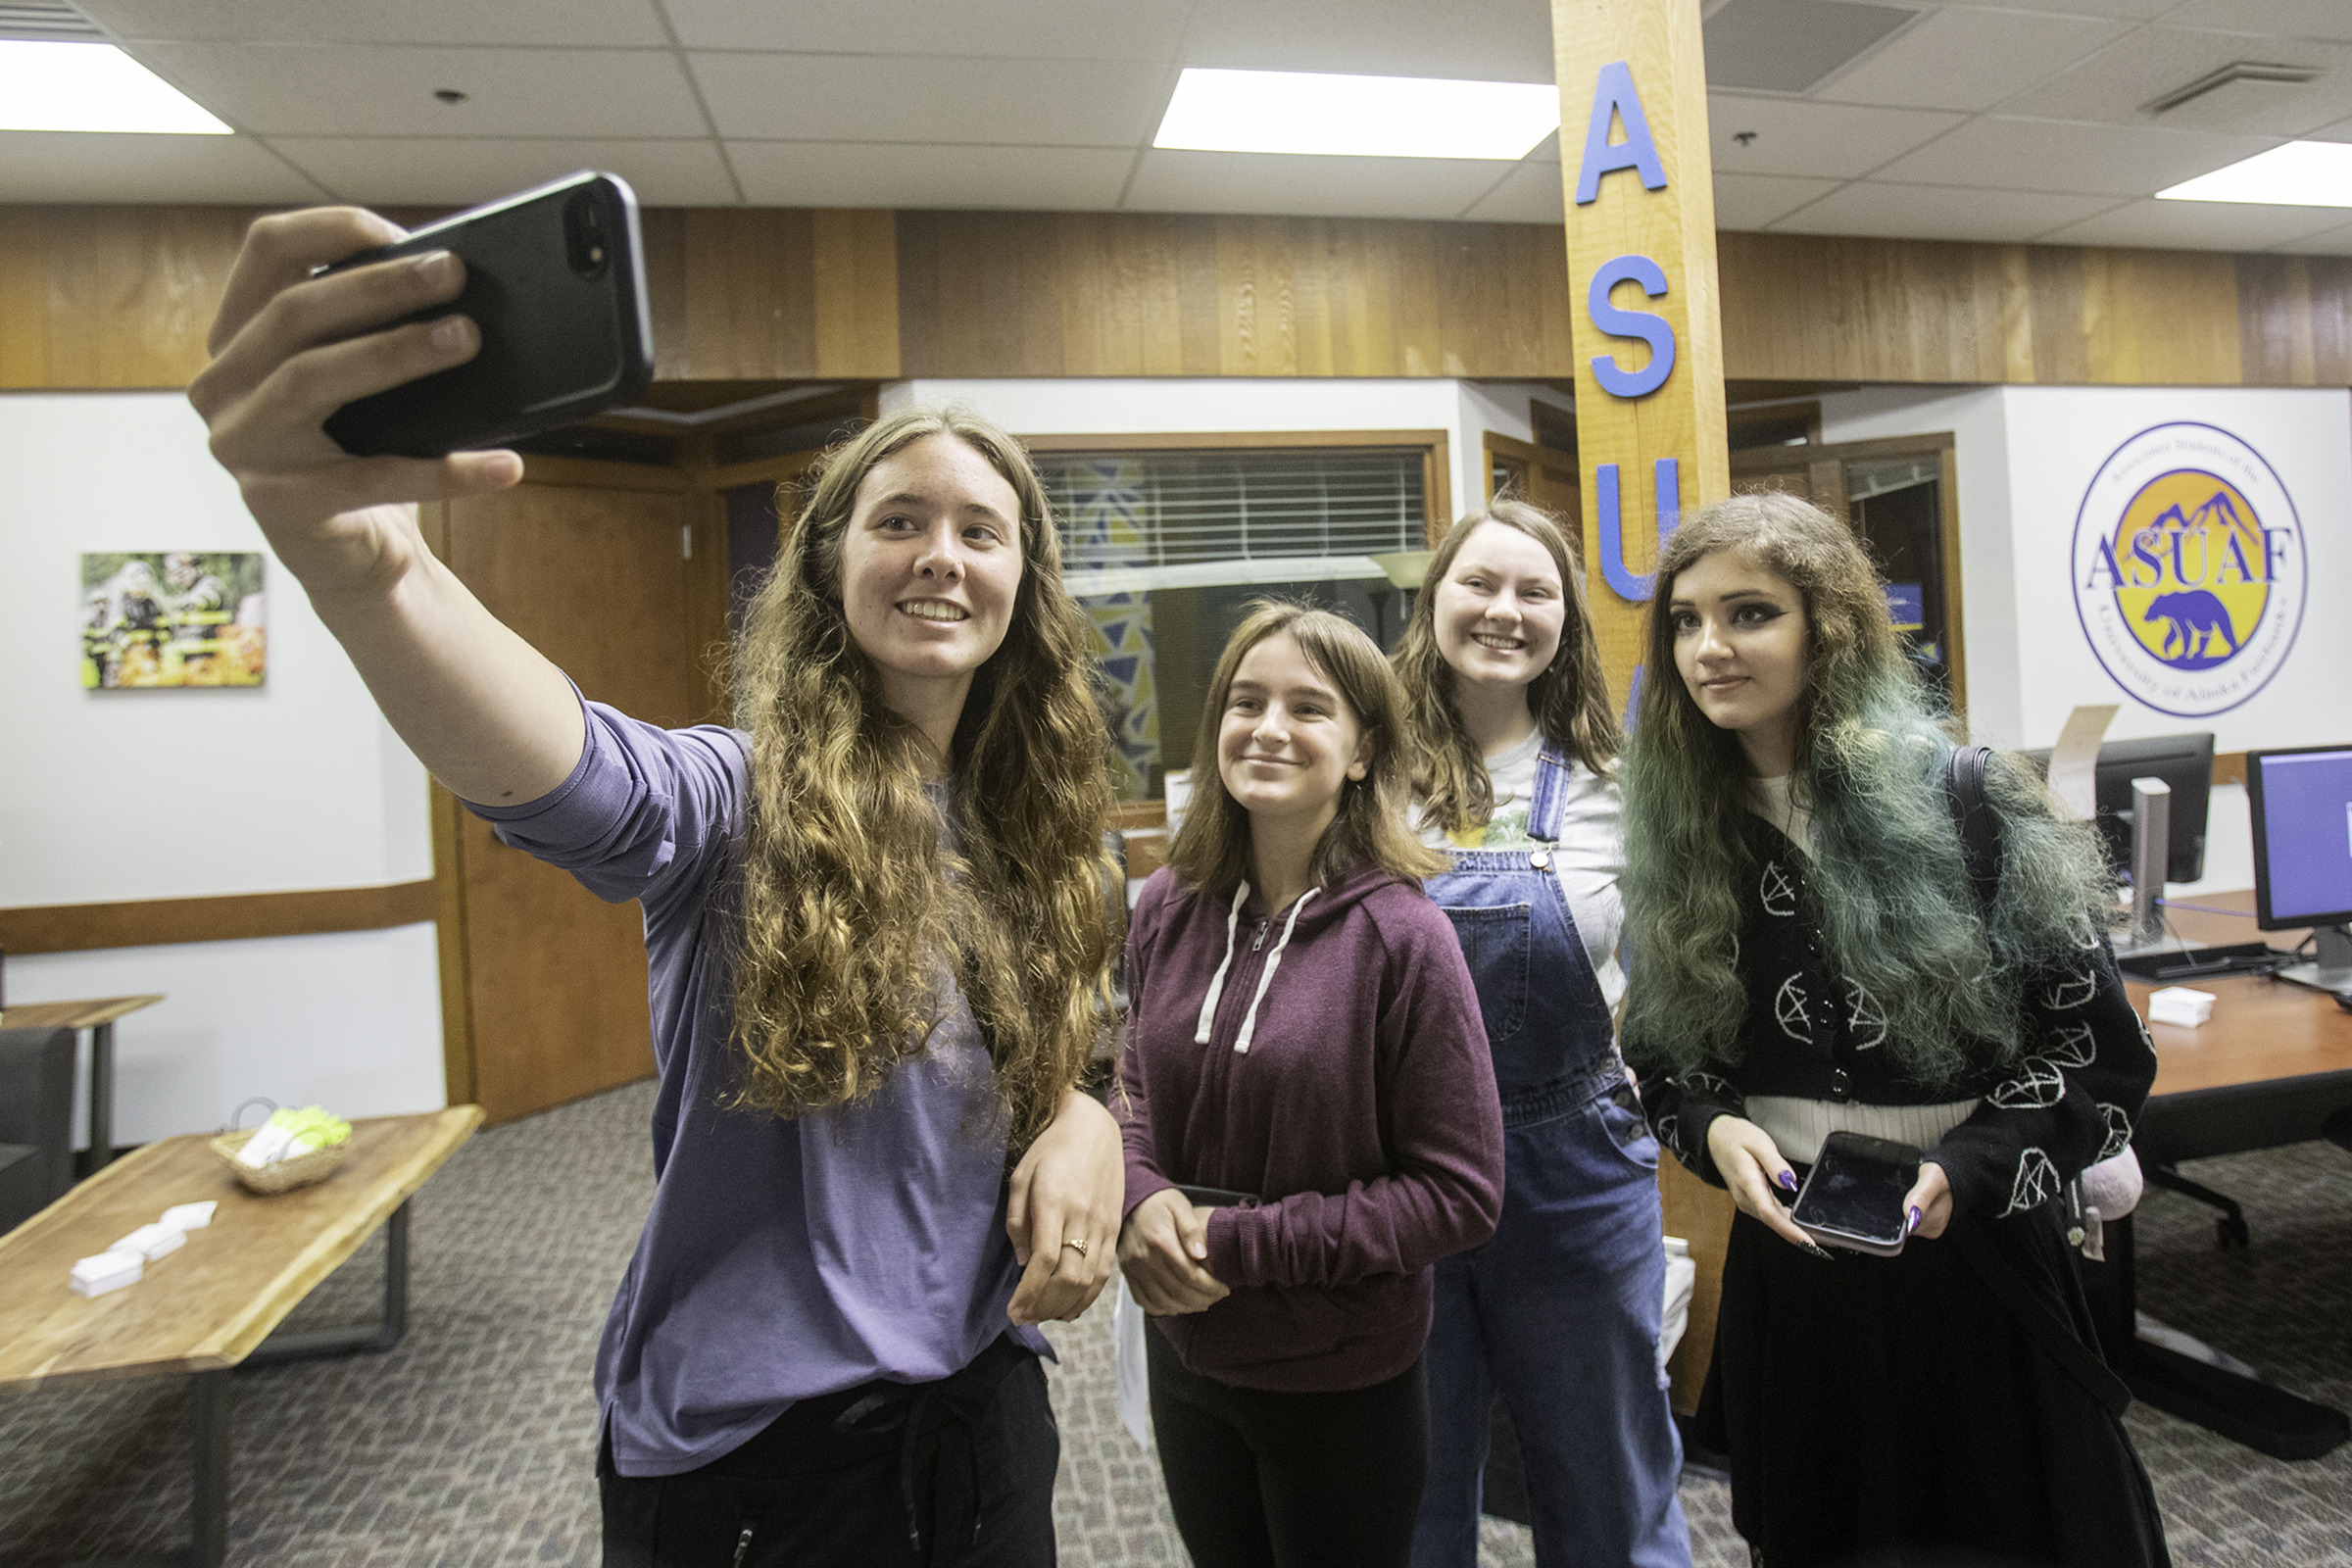 The UAF campus was abuzz with activity on the first day of fall classes as students (from left) Sarah Parks, Abbey Ames, Savannah Cowley and Jasmyne Rutan take a selfie photograph in the ASUAF student government office in the Wood Center for their Communication & Journalism 131 class scavenger hunt Monday, August 29, 2022. | UAF Photo by Eric Engman